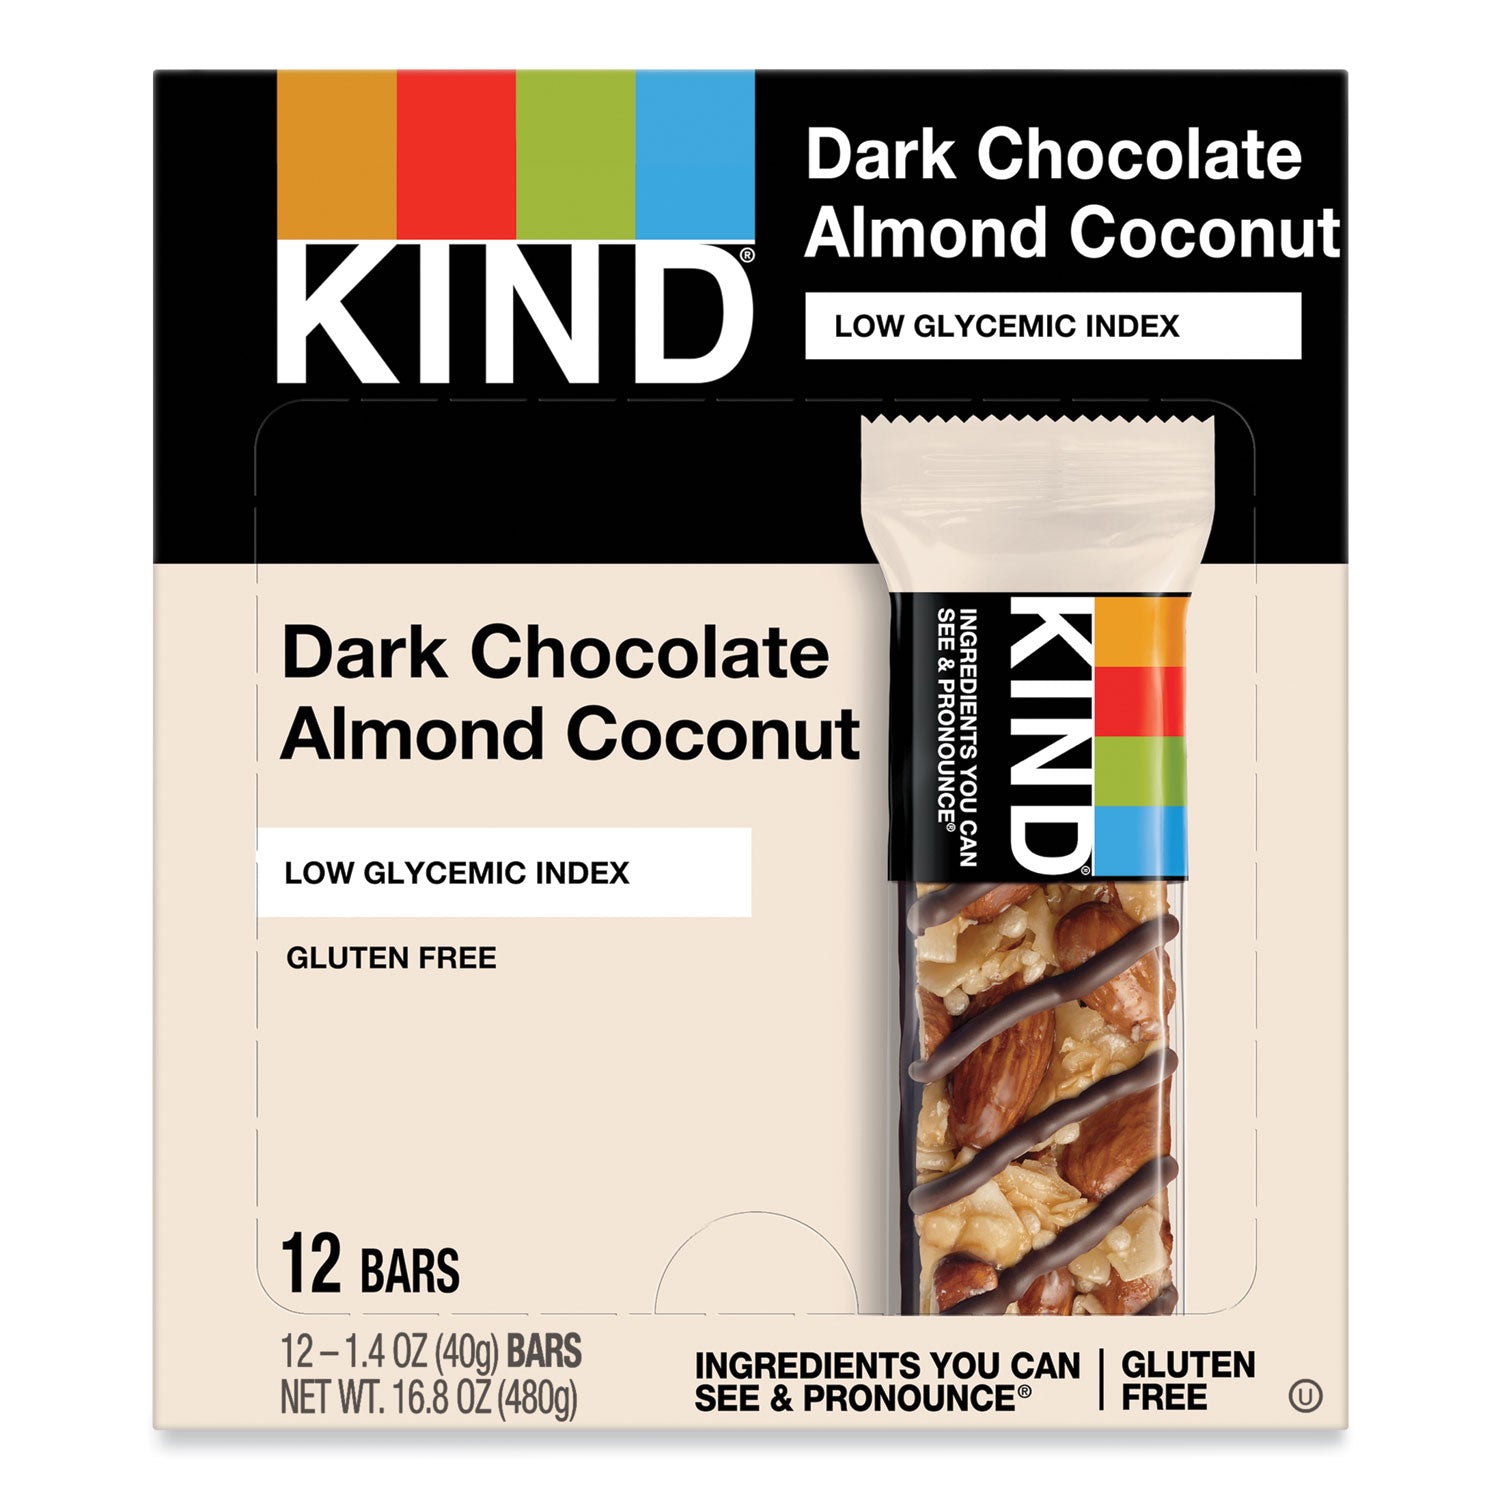 fruit-and-nut-bars-dark-chocolate-almond-and-coconut-14-oz-bar-12-box_knd19987 - 1